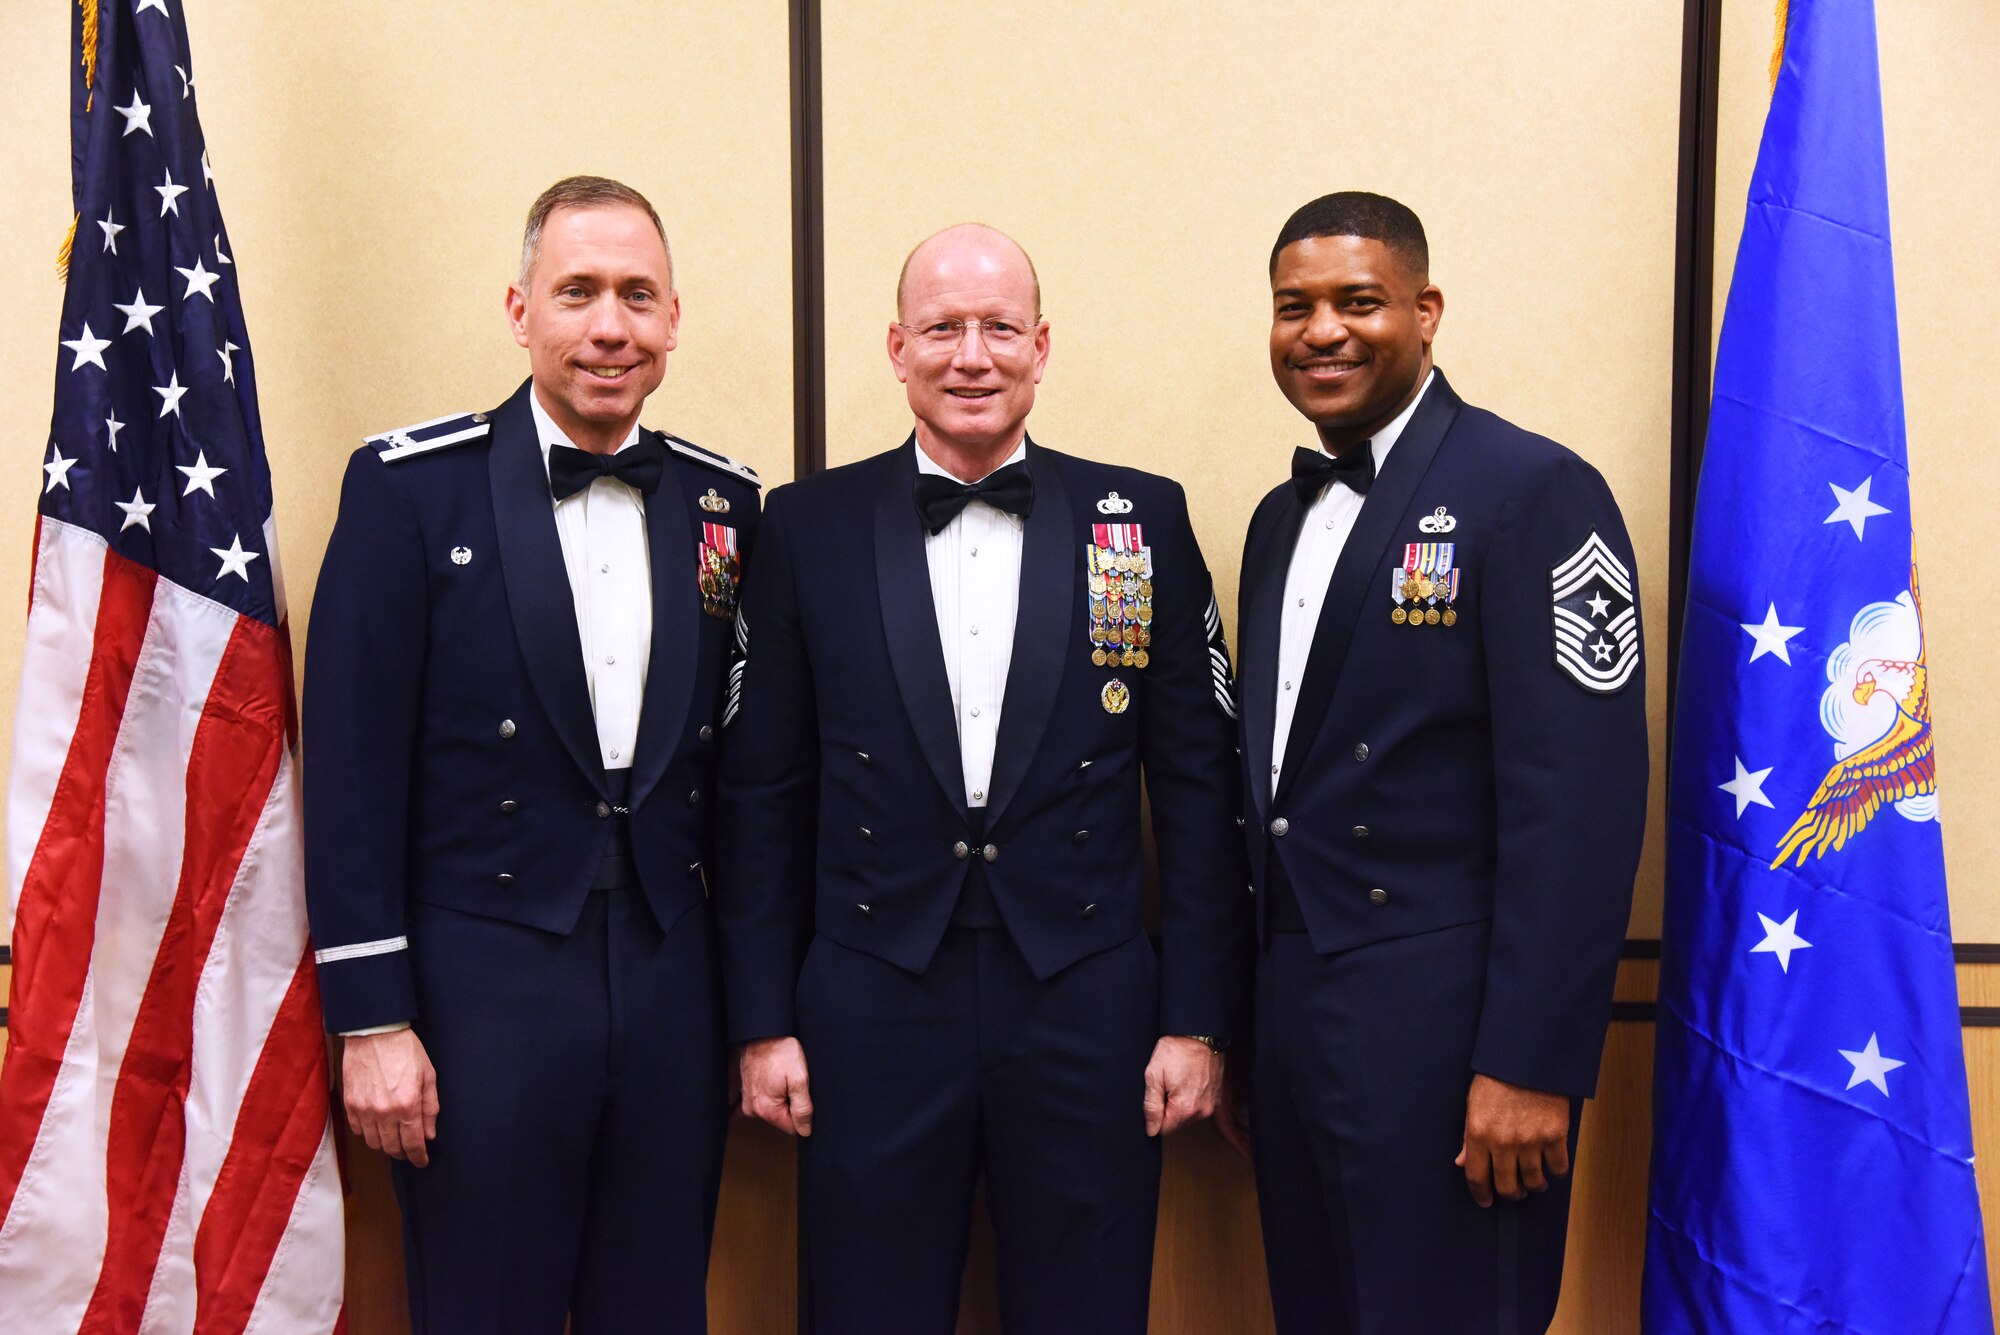 From left to right, Col. John Wilcox, 341st Missile Wing commander; Chief Master Sgt. Terry West, Air Force Global Strike Command command chief; and Chief Master Sgt. Phillip Easton, 341st MW command chief, pose for a photograph at Malmstrom Air Force Base’s Grizzly Bend during the 2014 Annual Awards Banquet Feb. 20. West, who was on a two-day tour of the base, was the event’s guest speaker. (U.S. Air Force Photo/Airman 1st Class Collin Schmidt) 